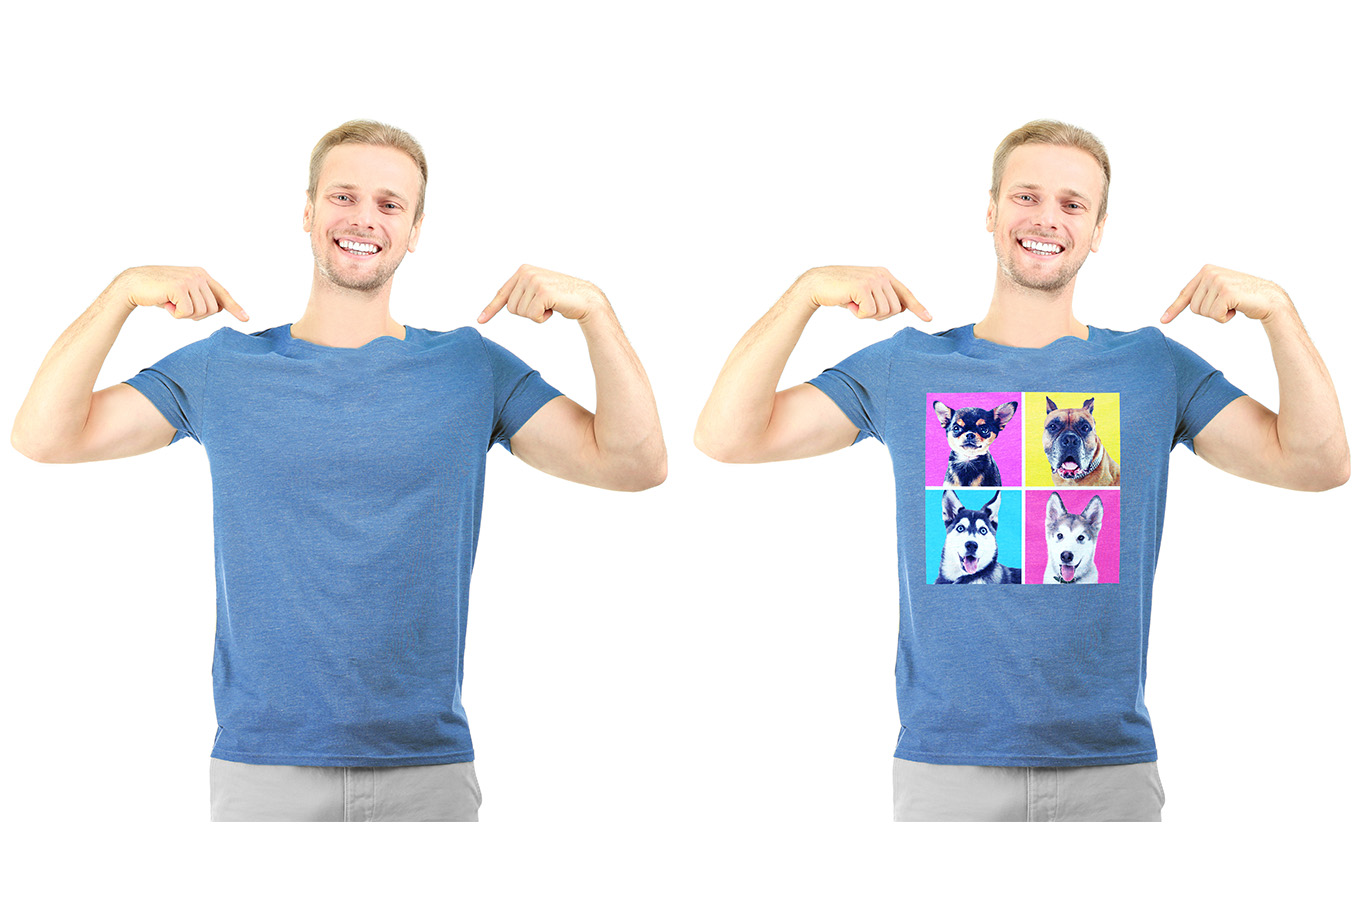 What Are Digital T Shirt Printing Services?